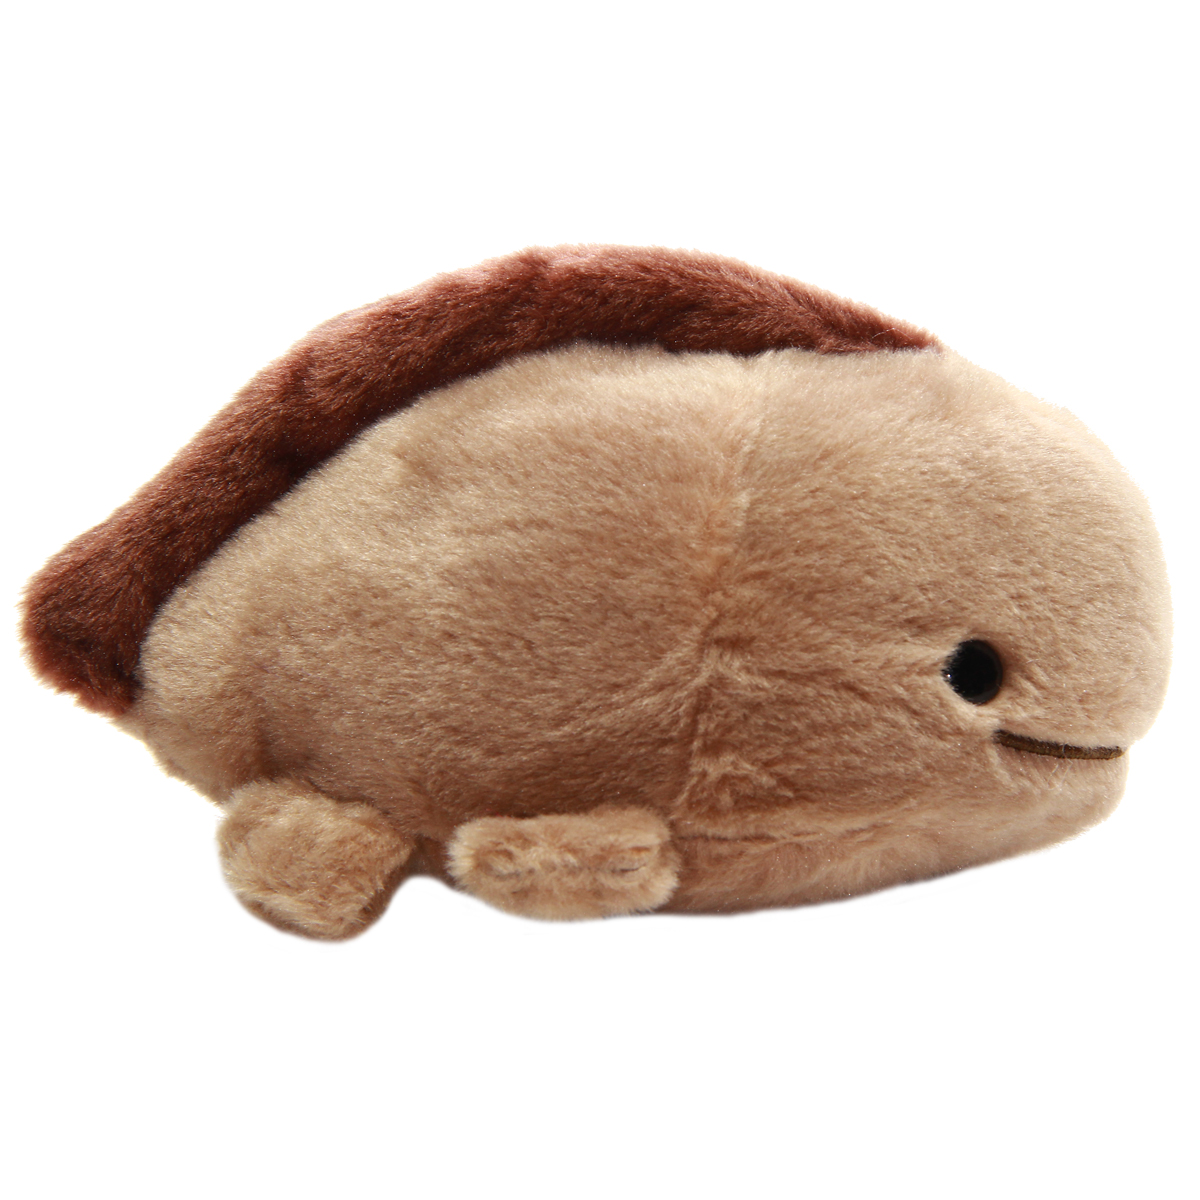 Salamander Plushie Super Soft Squishy Stuffed Animal Toy Brown Size 6 Inches